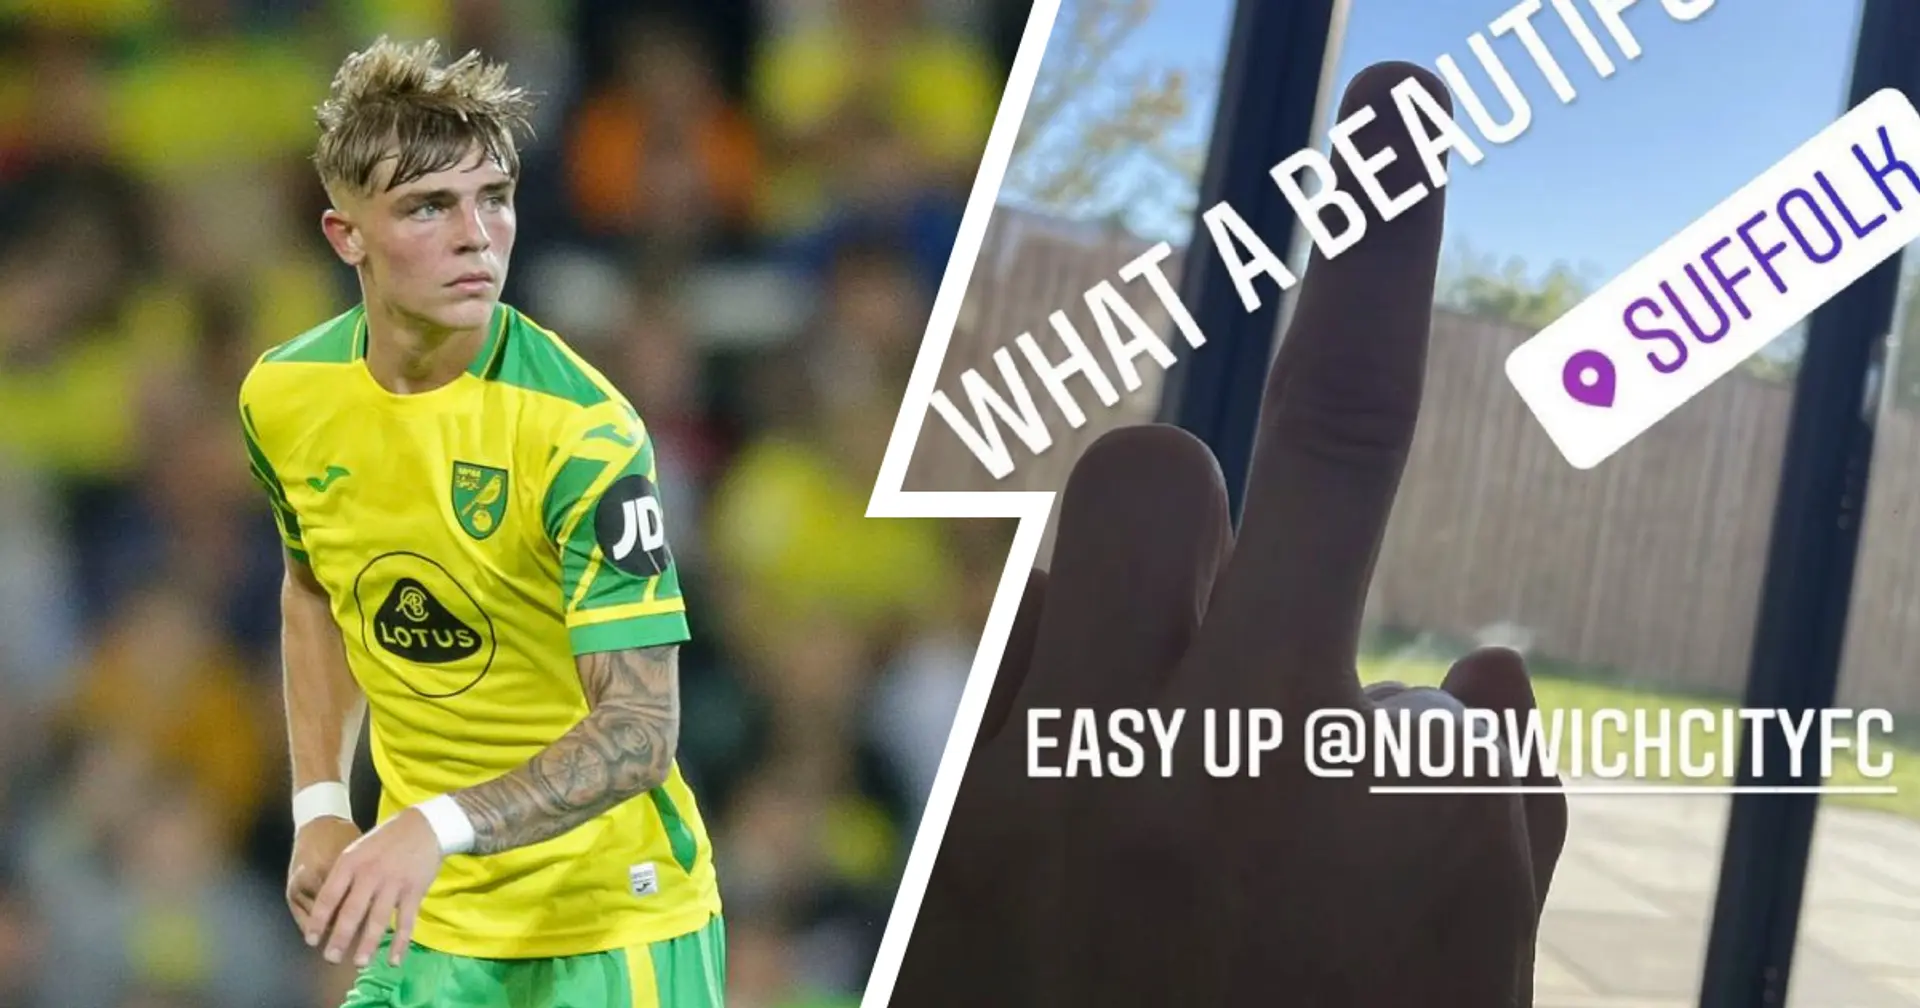 Norwich City investigating Brandon Williams for insulting Instagram post after West Ham loss